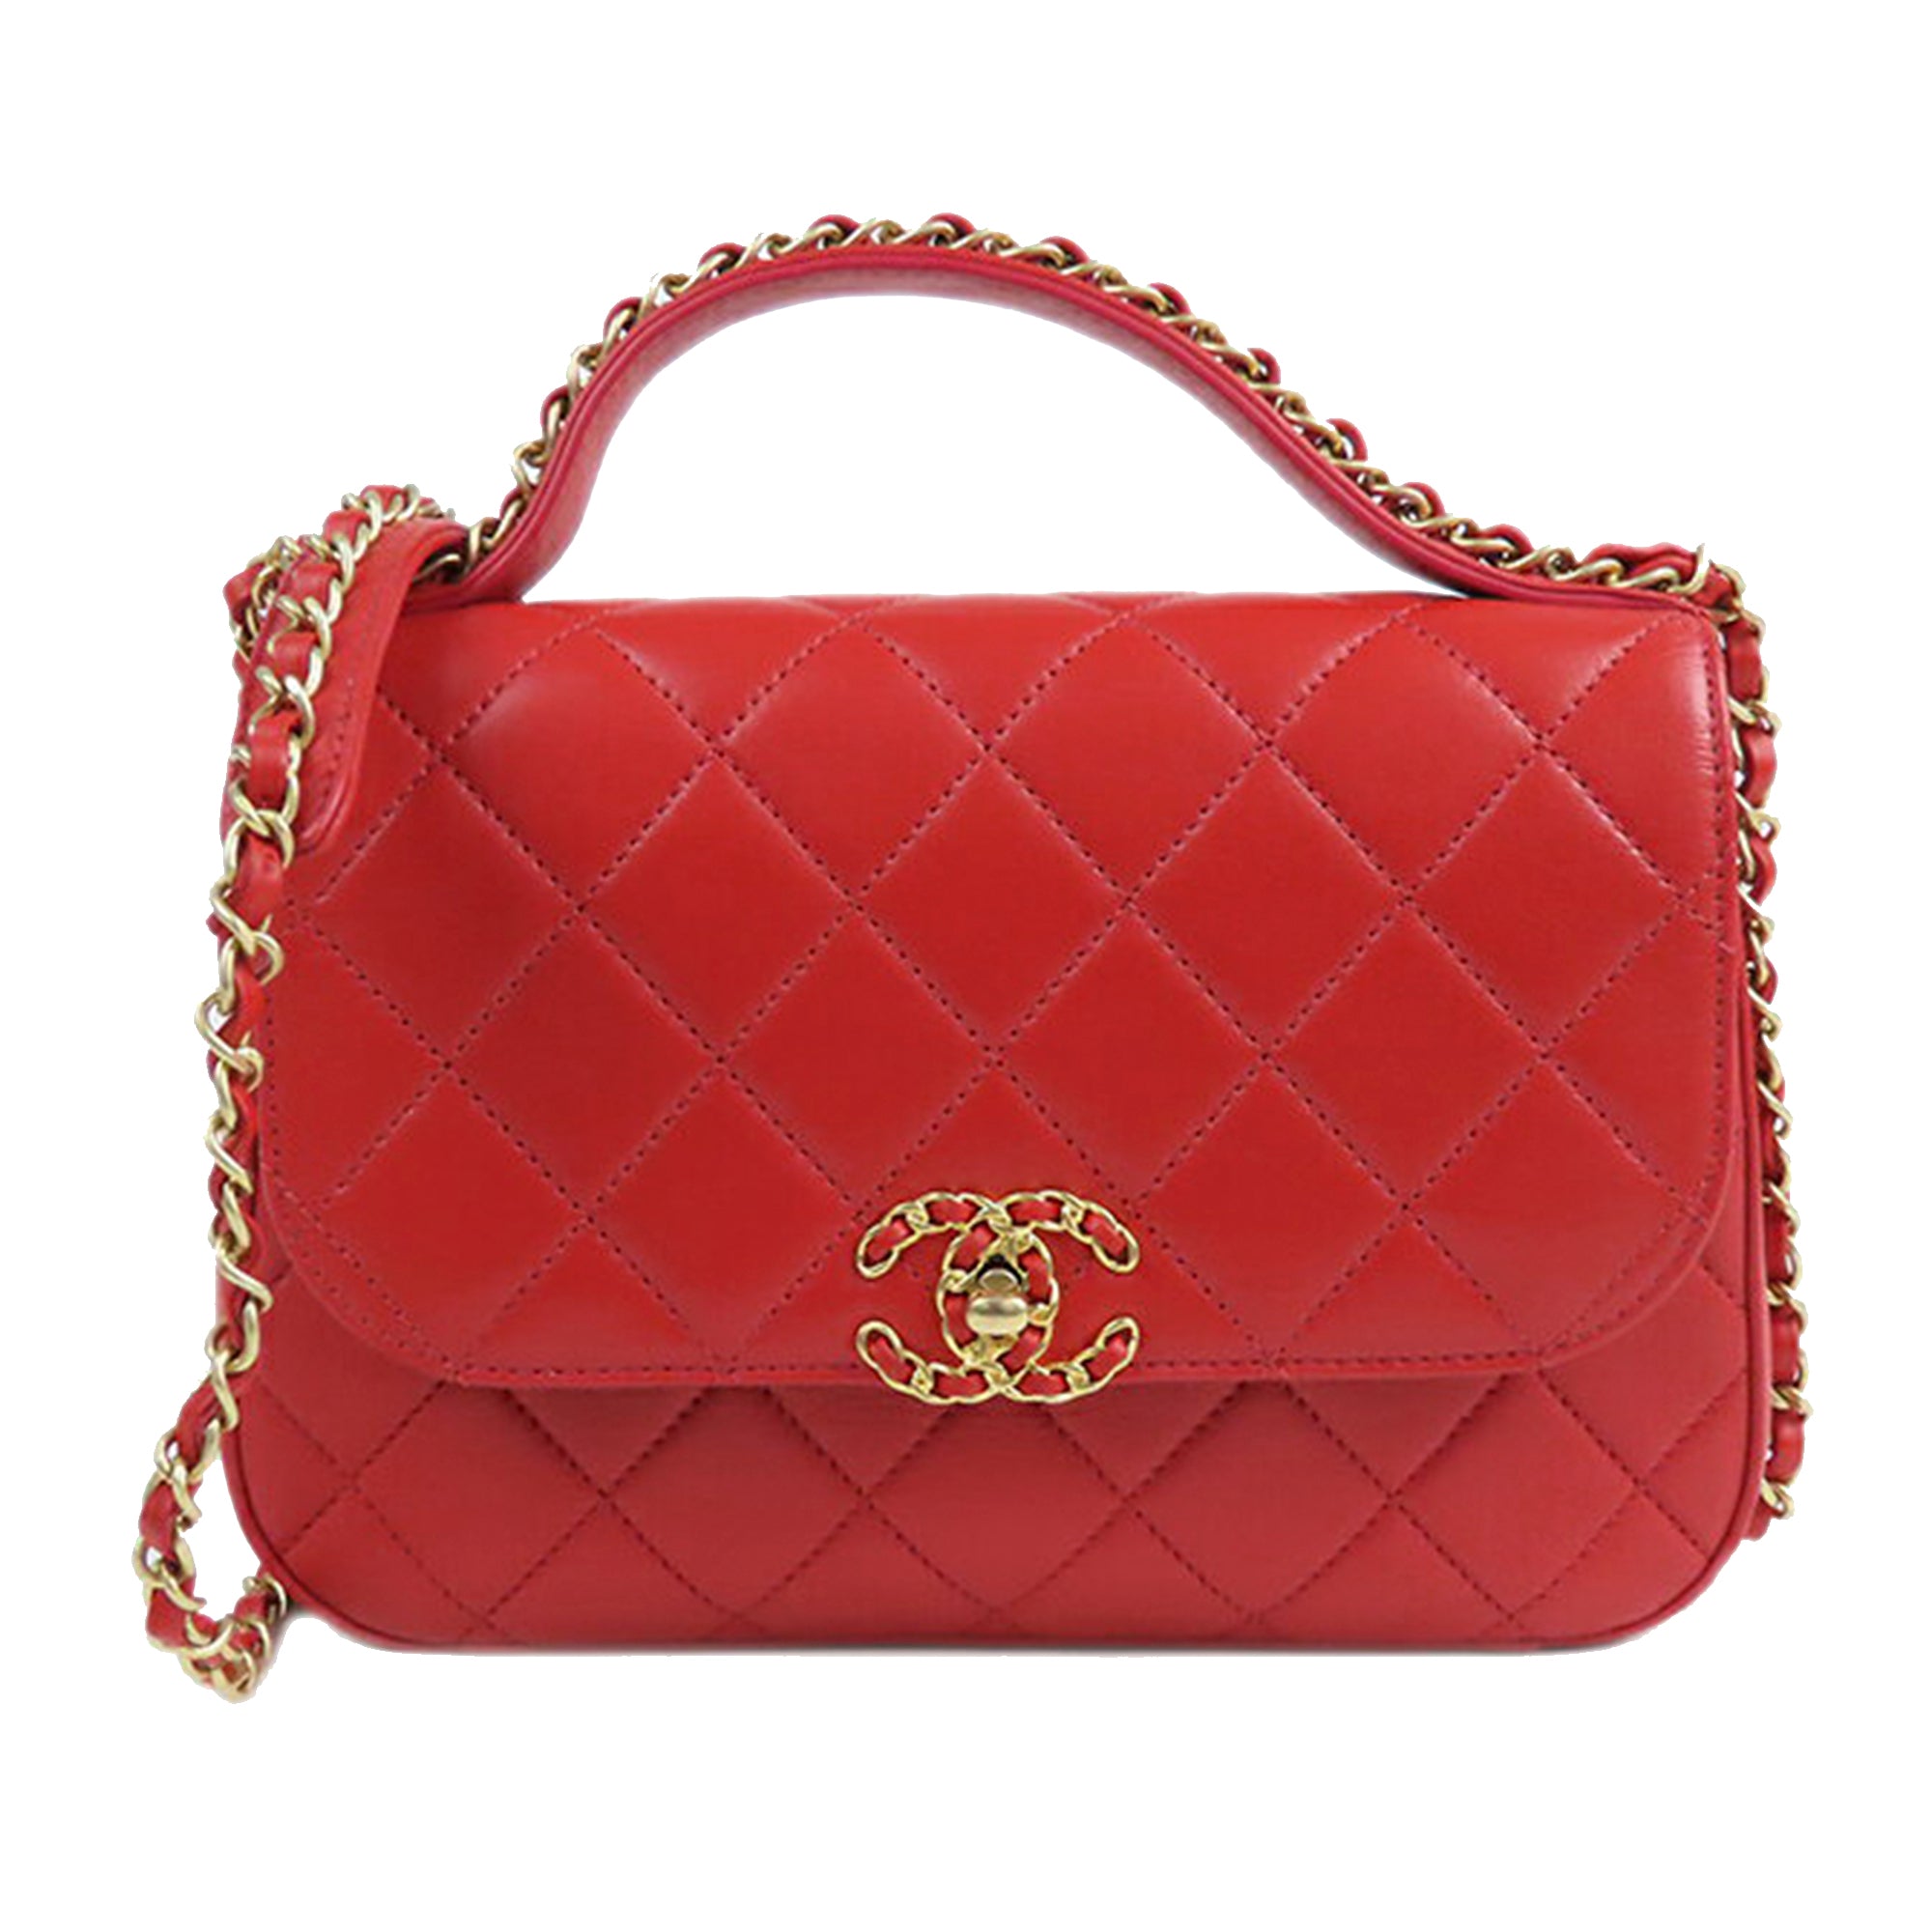 Red Chanel Bag, Shop The Largest Collection